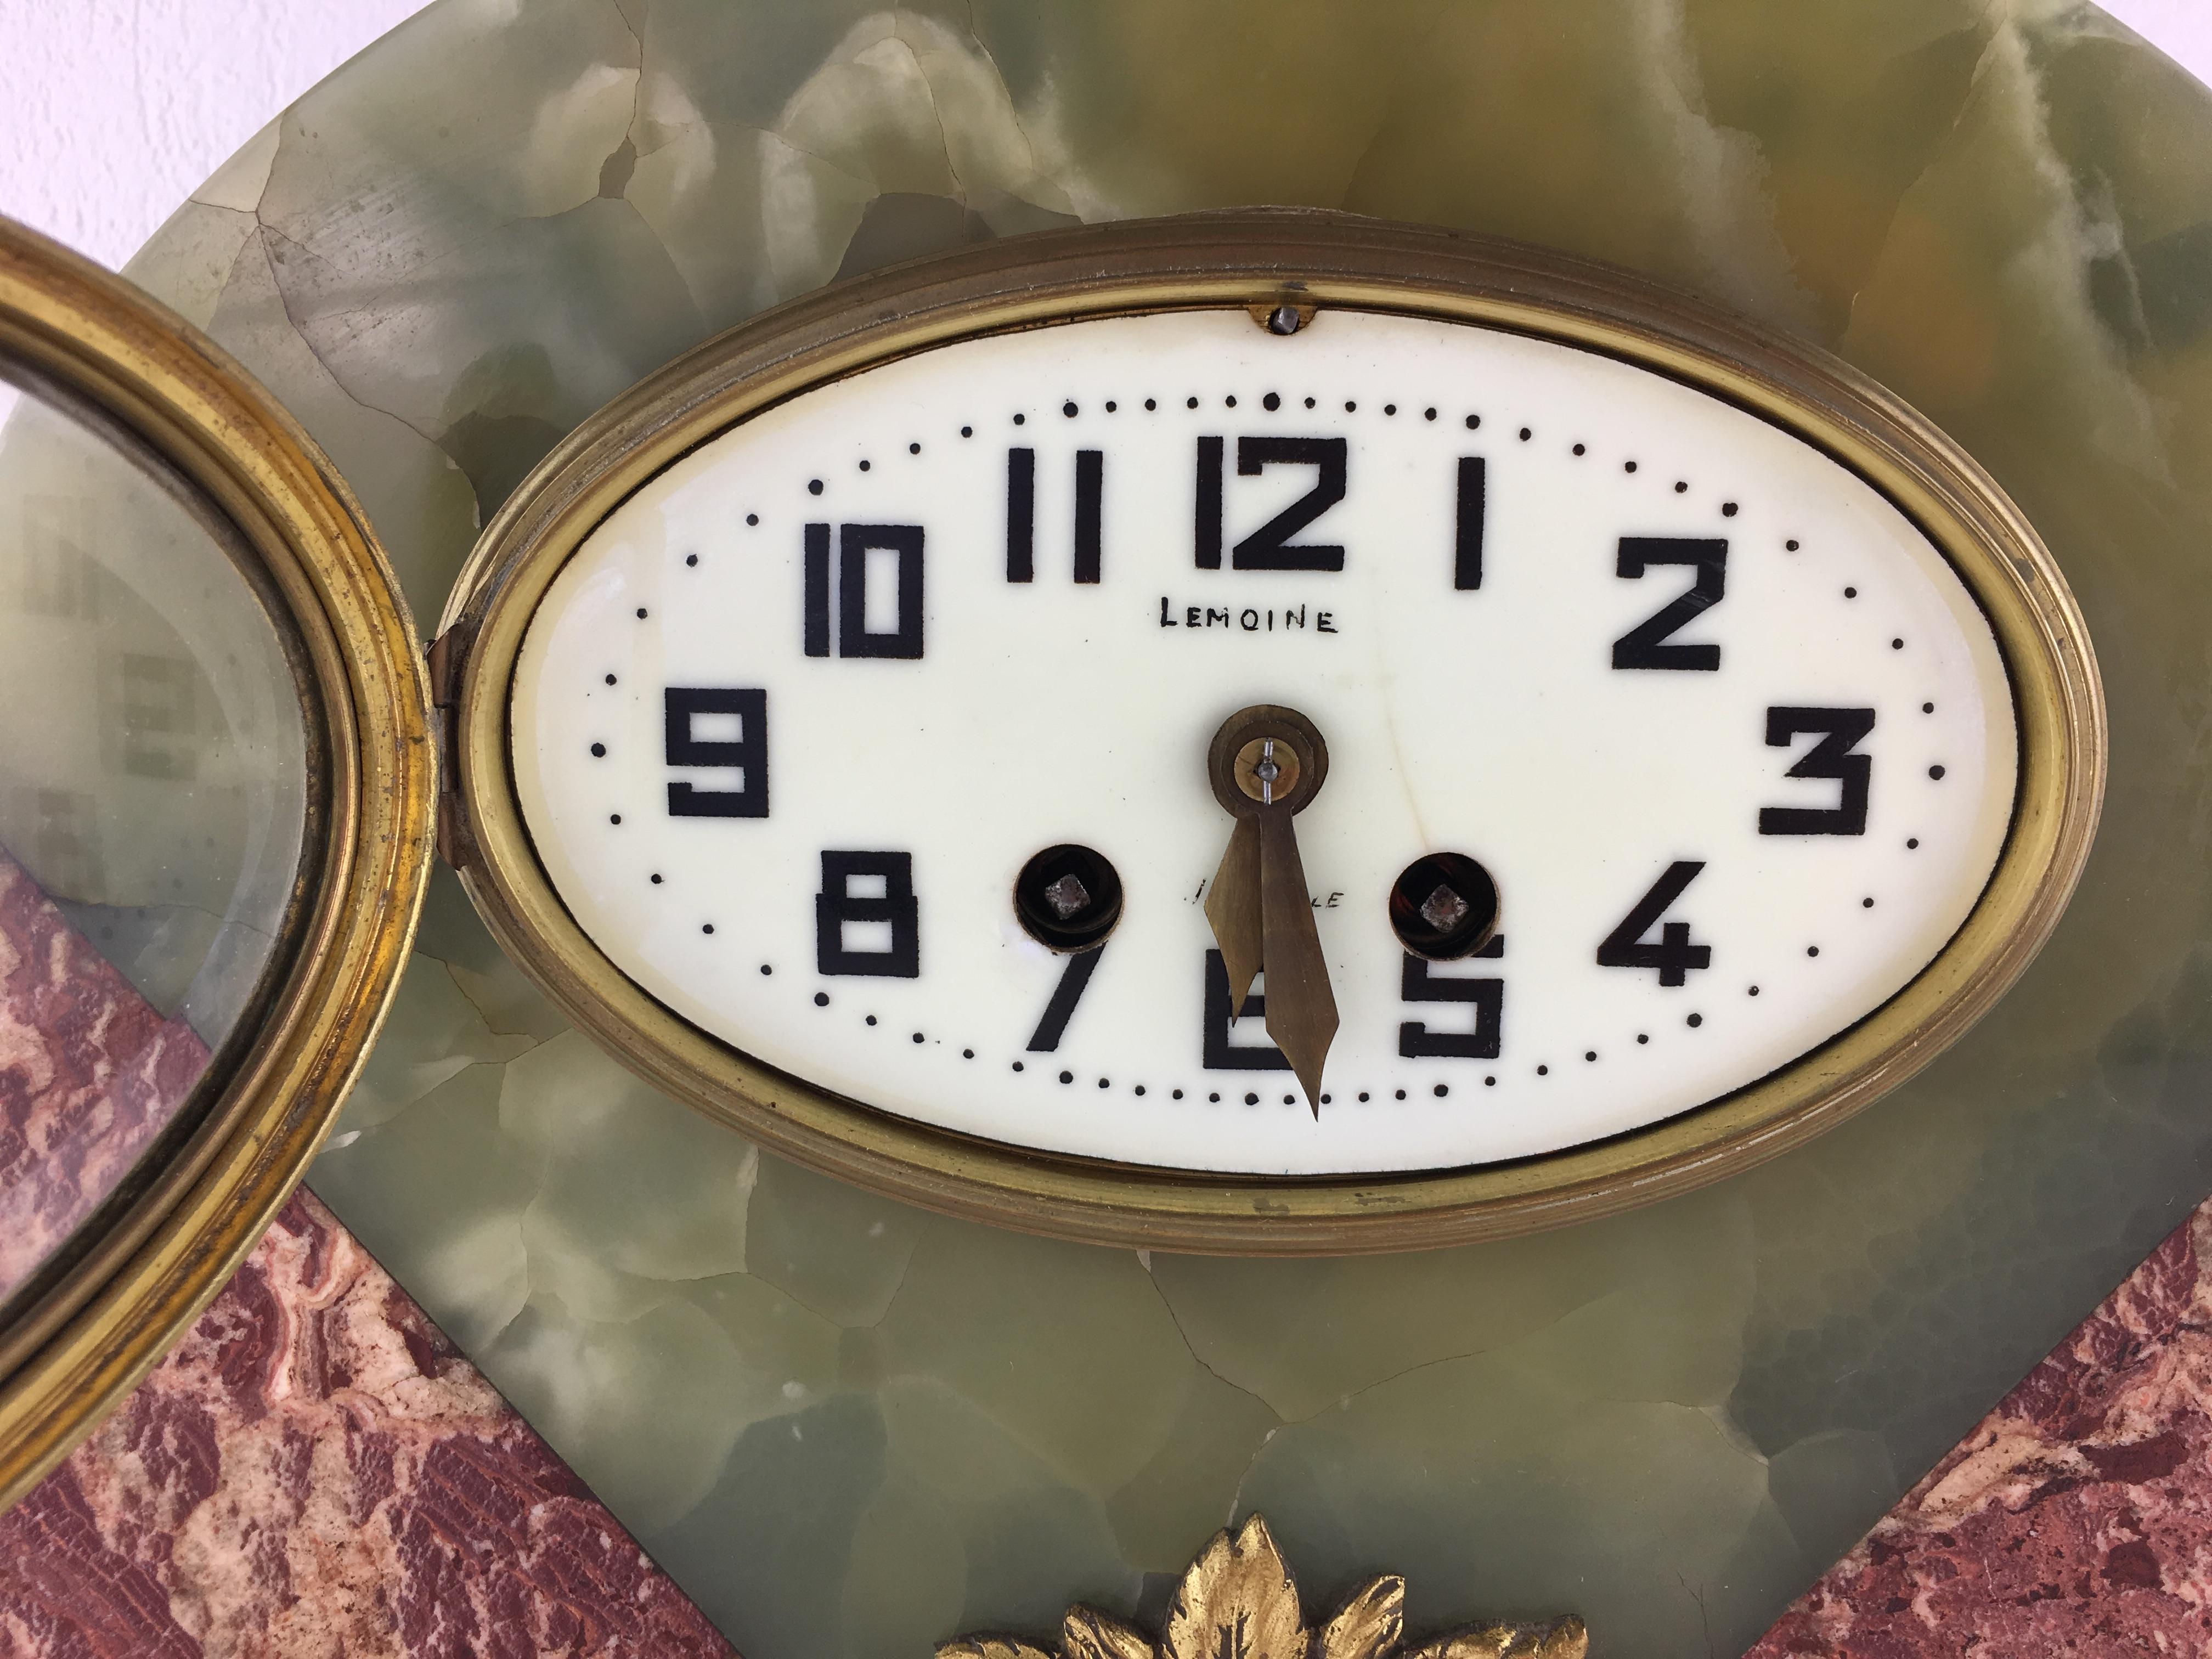 A historical and stunning three-piece French Art Deco mantel clock and garniture set with a fine French movement signed Bennet & Pottier made in Paris, France. Finished on all sides, the stone quality and craftsmanship are of high quality.

This